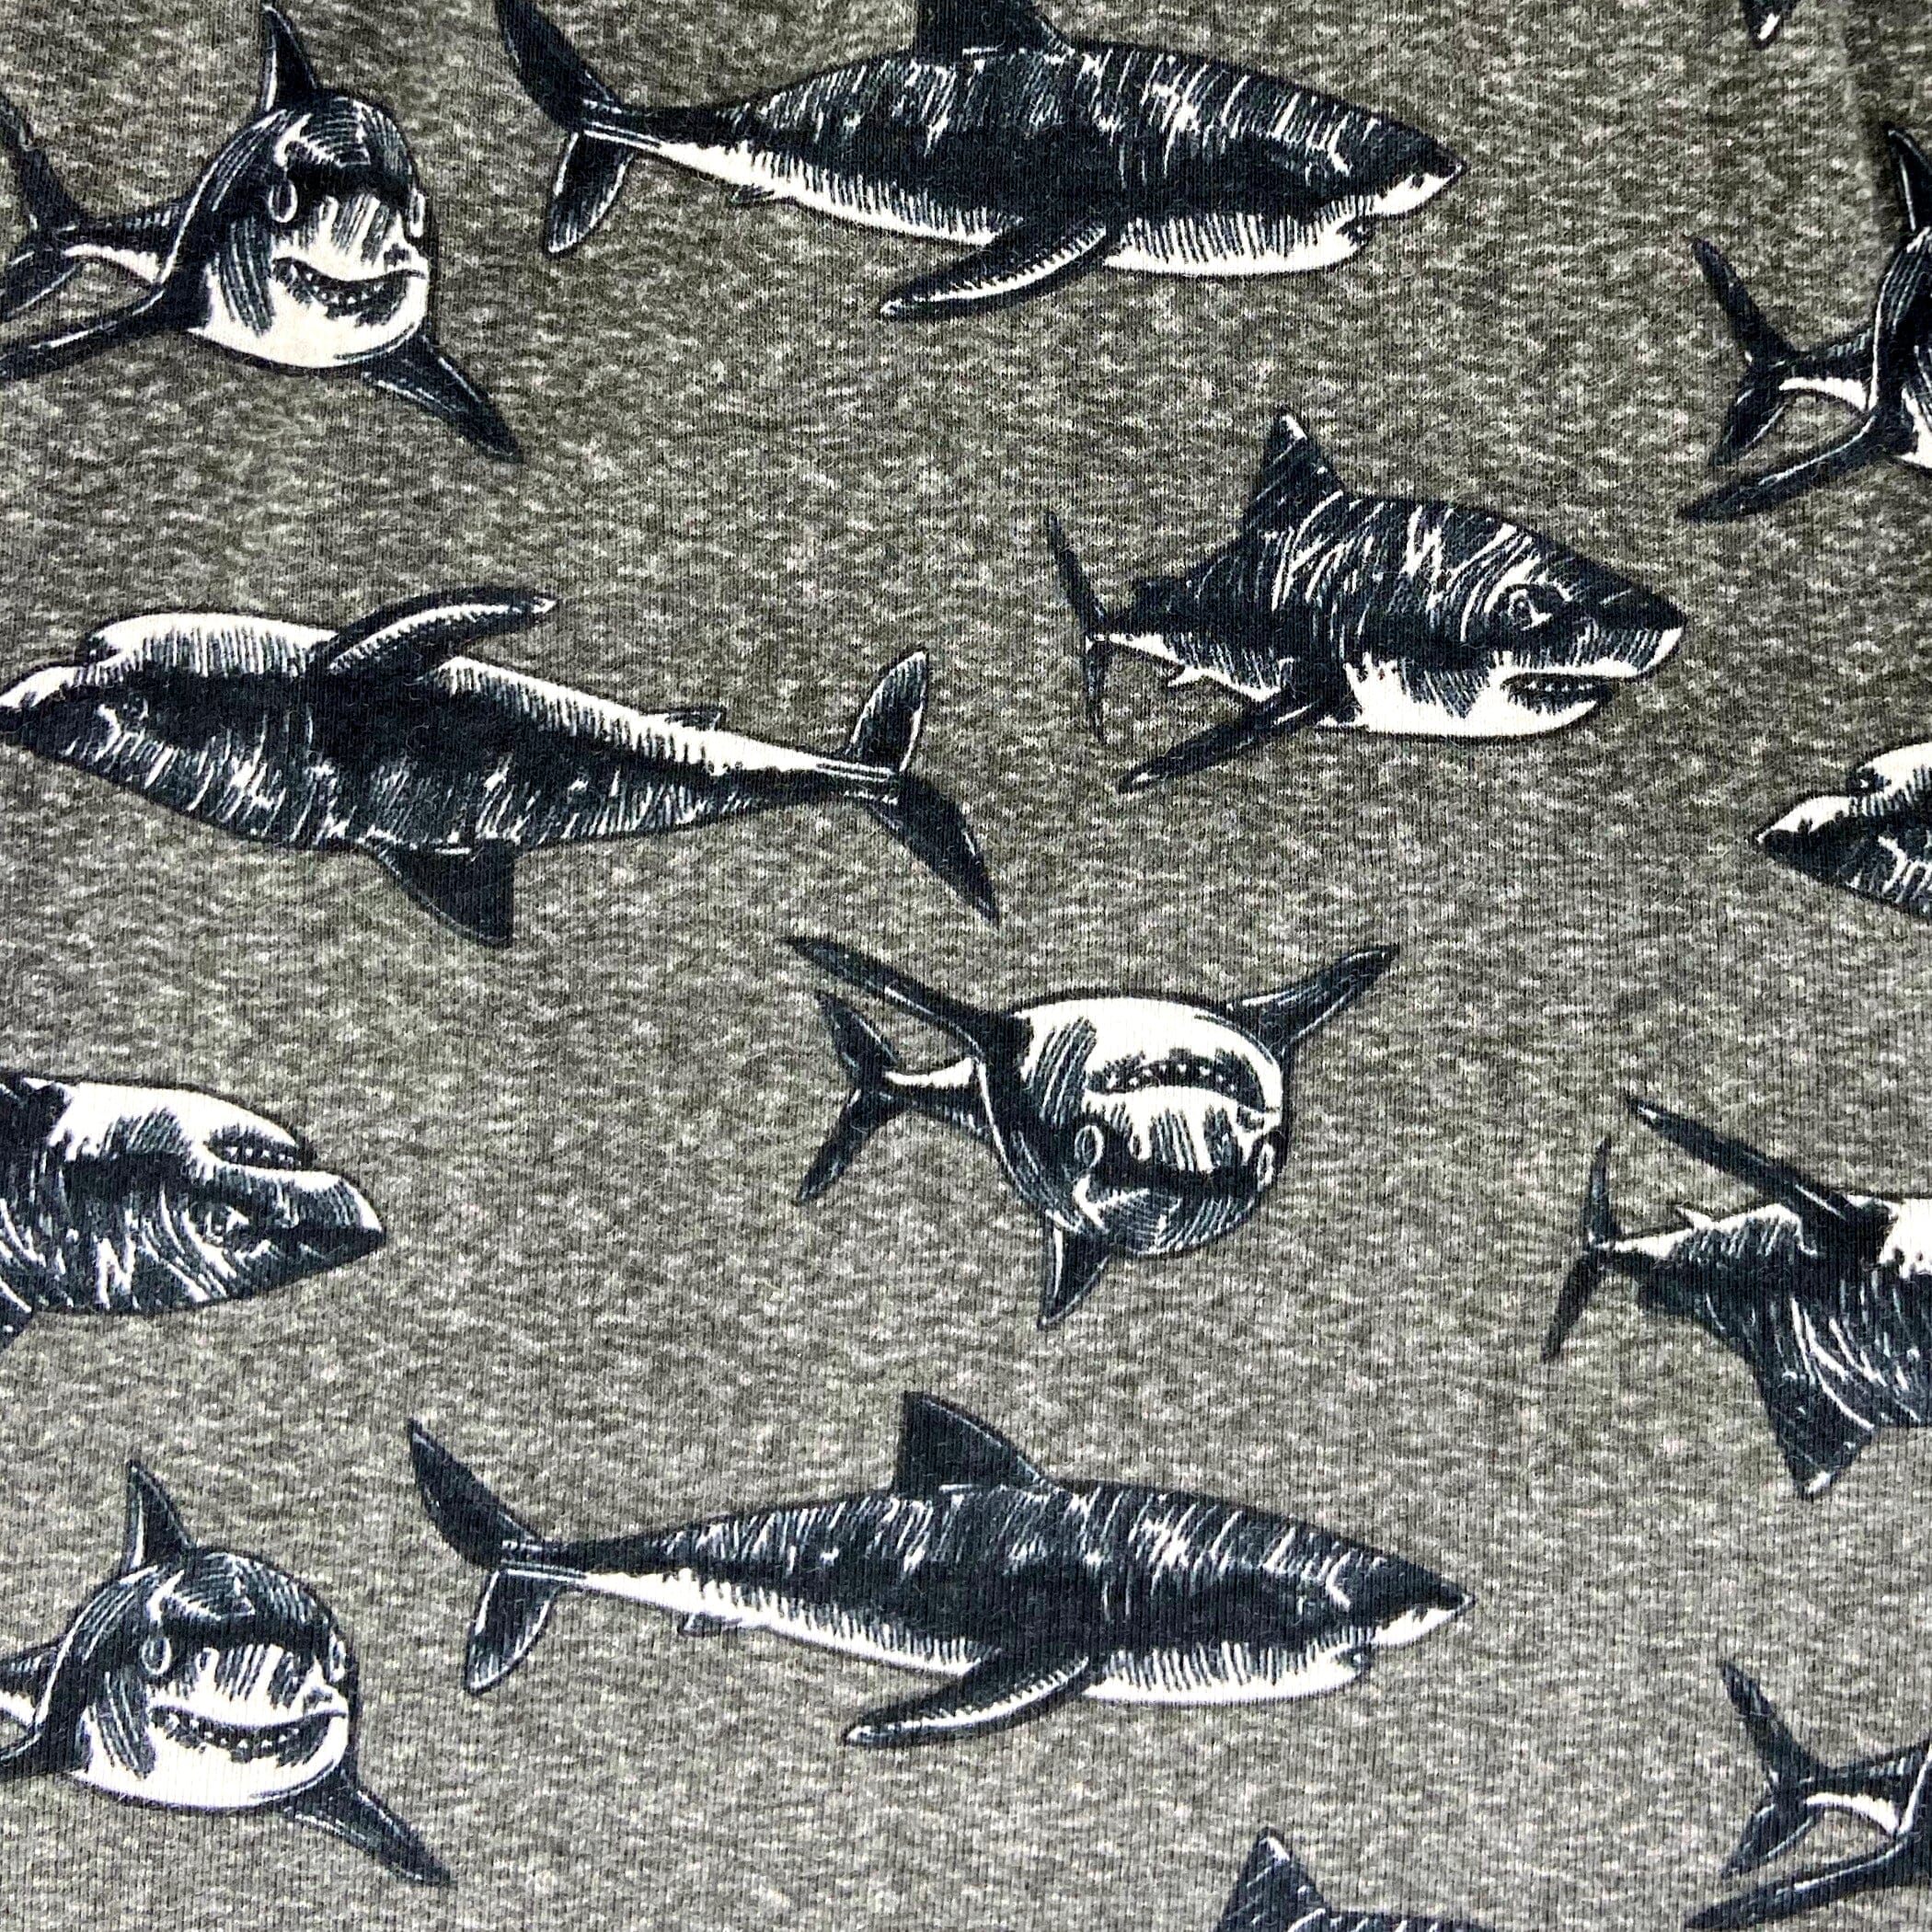 Men's Great White Shark All-Over Print Cotton Knit Boxer Pajama Shorts